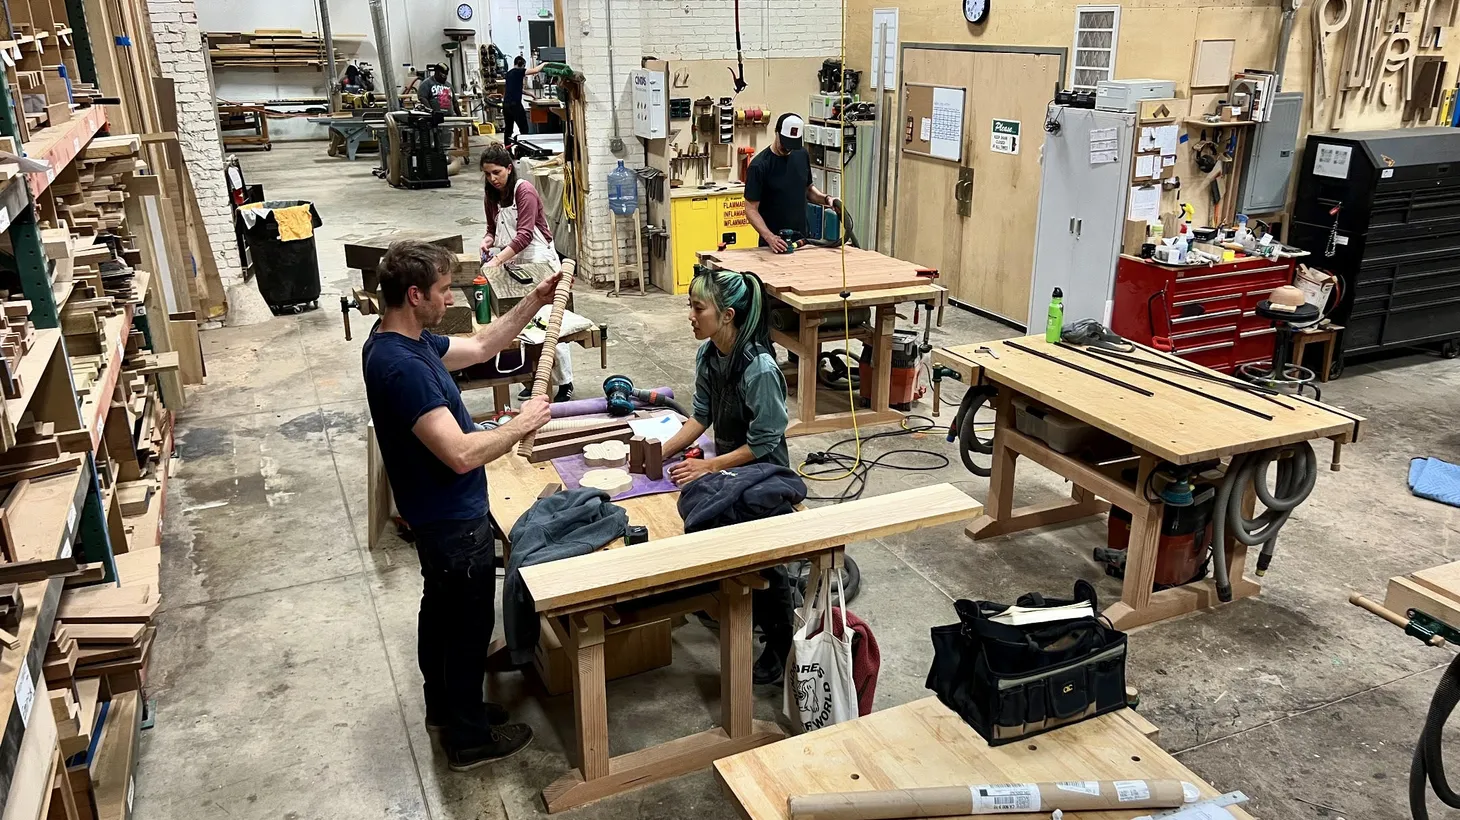 Students and instructors work on craft and carpentry projects inside the LA Woodshop’s 7,000-square-foot space in Downtown Los Angeles.